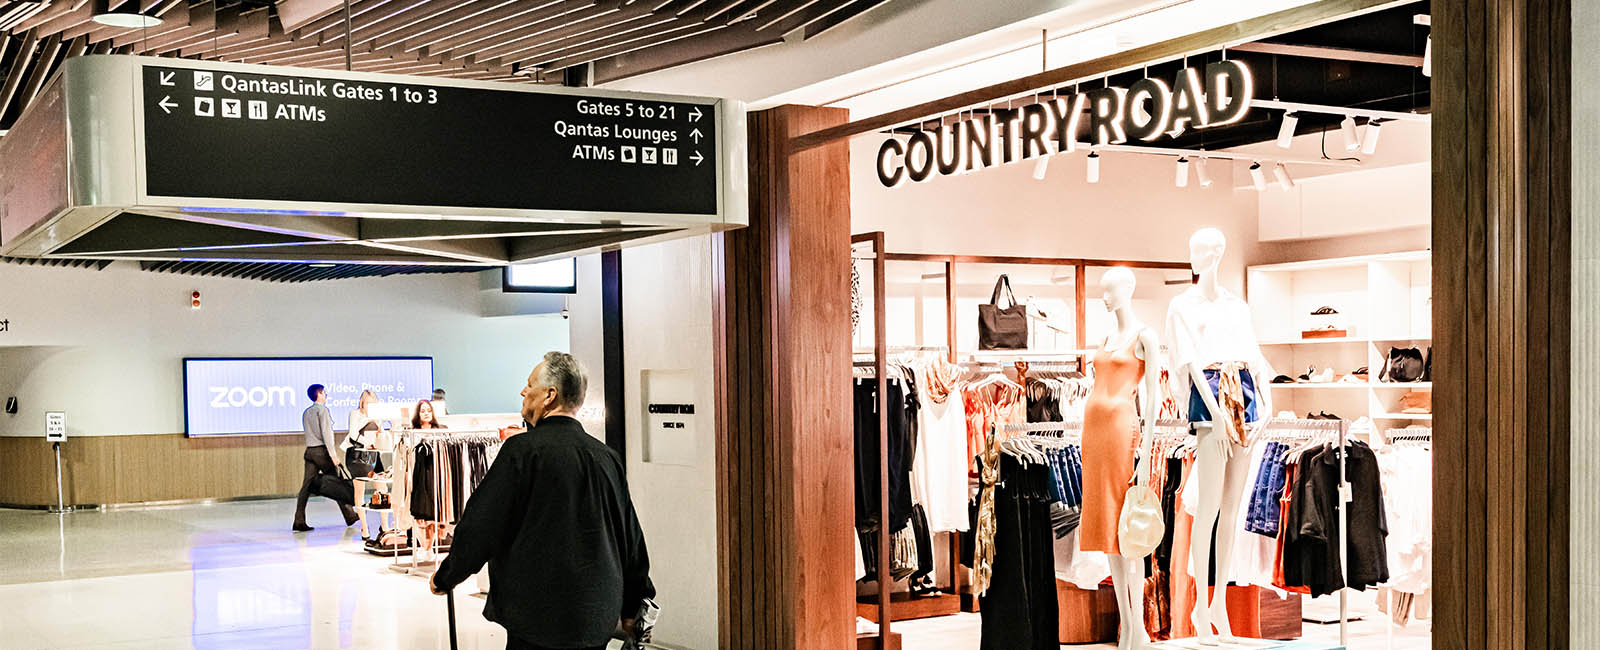 Country Road store front at BNE's Domestic Terminal